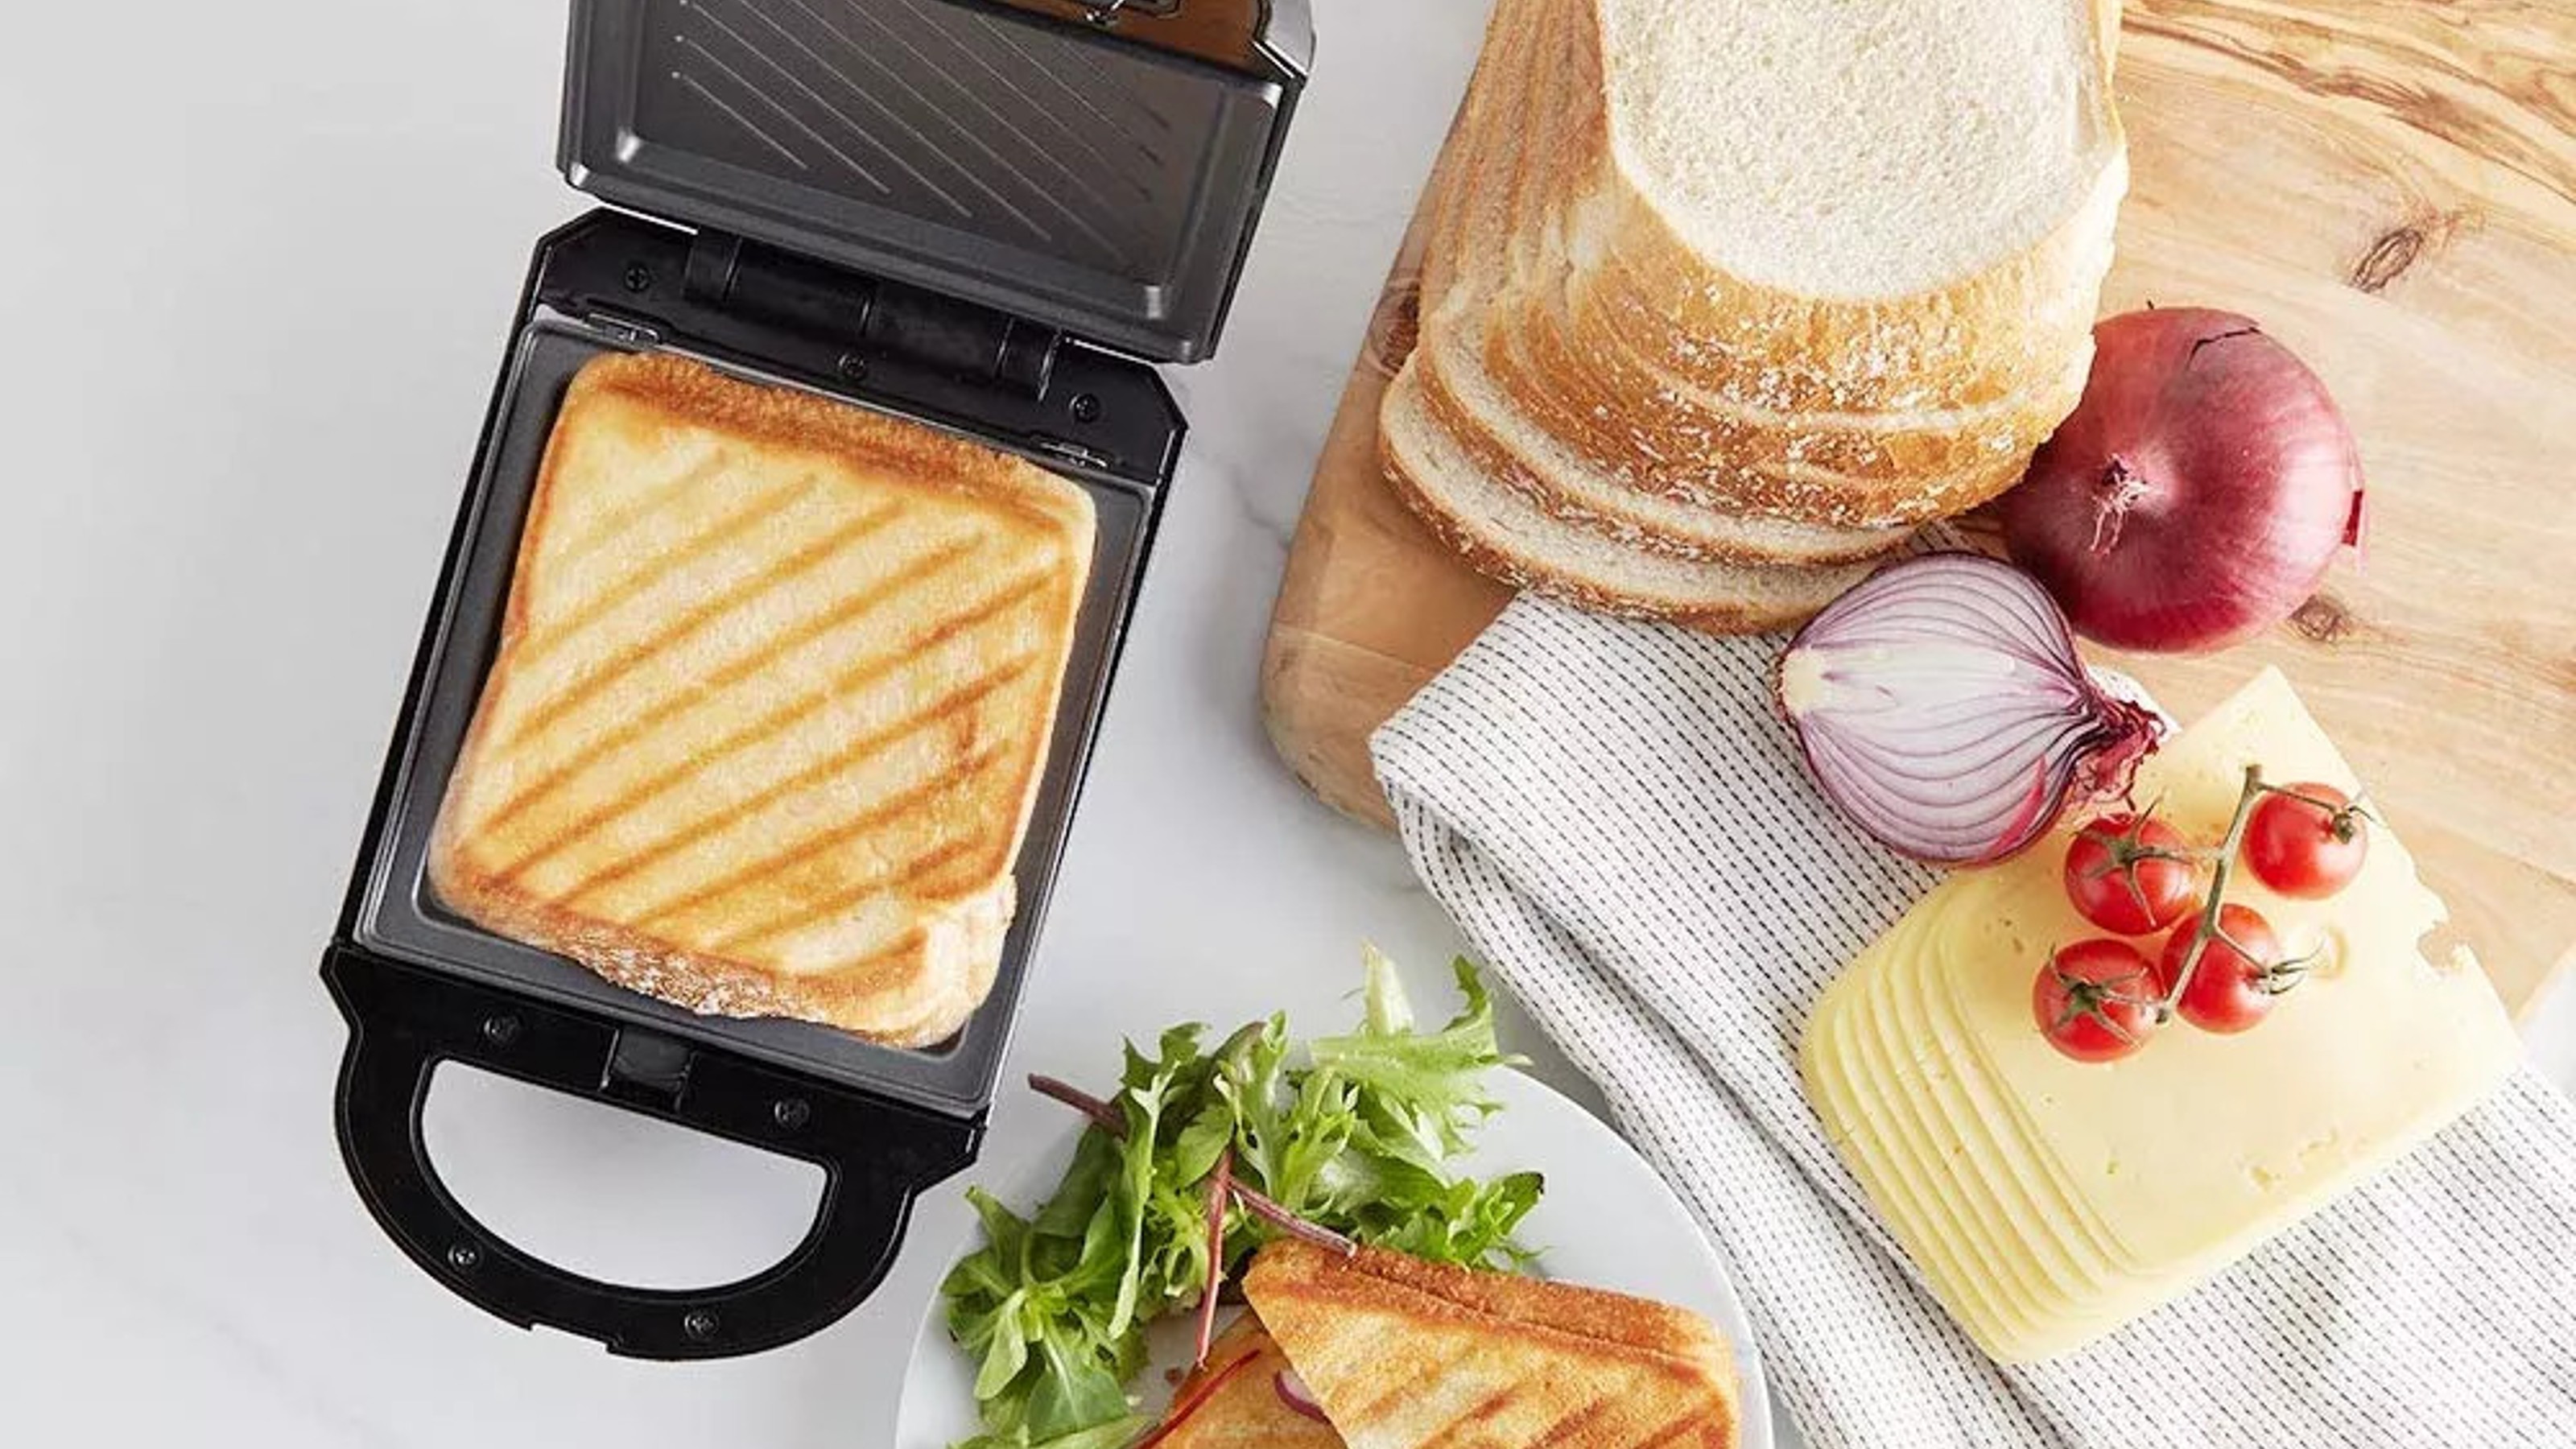 Home Sandwich Machine Stainless Steel Toaster Deep Fill 2 Slice Toastie Maker with Easy Clean Sandwich Toaster 750W Non-Stick Plates & Cool Touch Handles 